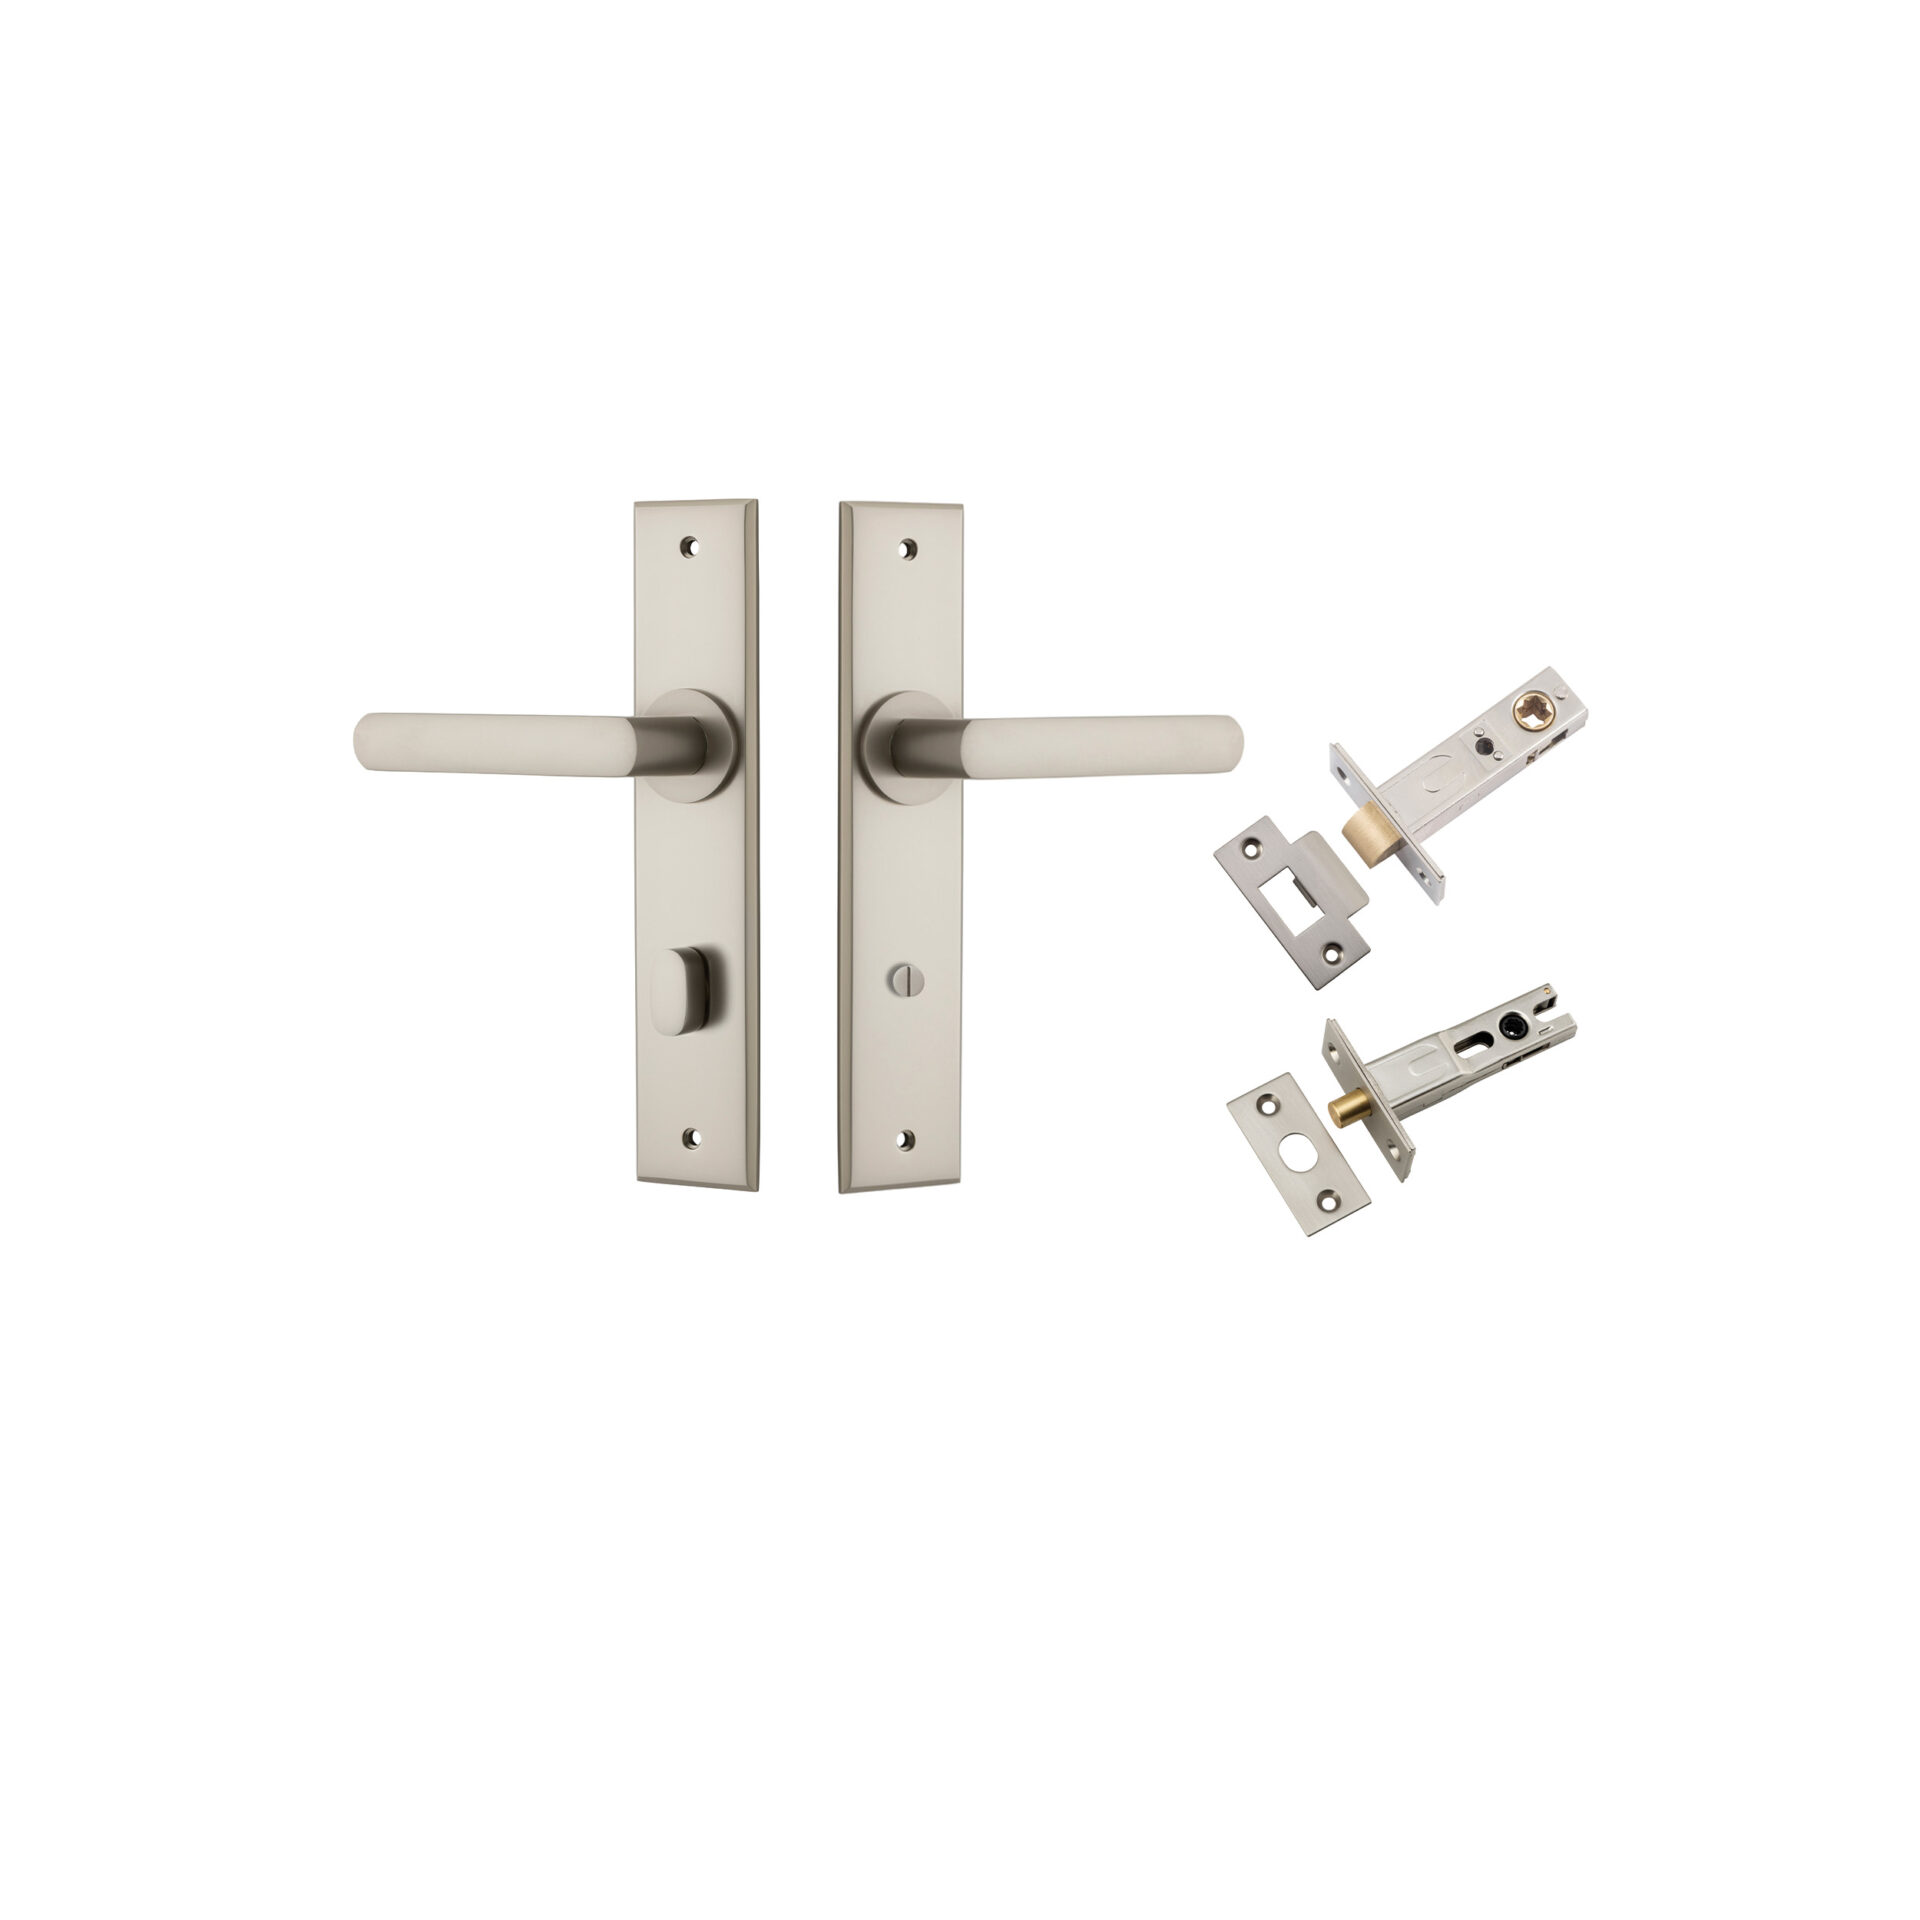 14868KPRIV60 - Osaka Lever - Chamfered Backplate Privacy Kit with Privacy Turn - Satin Nickel - Privacy